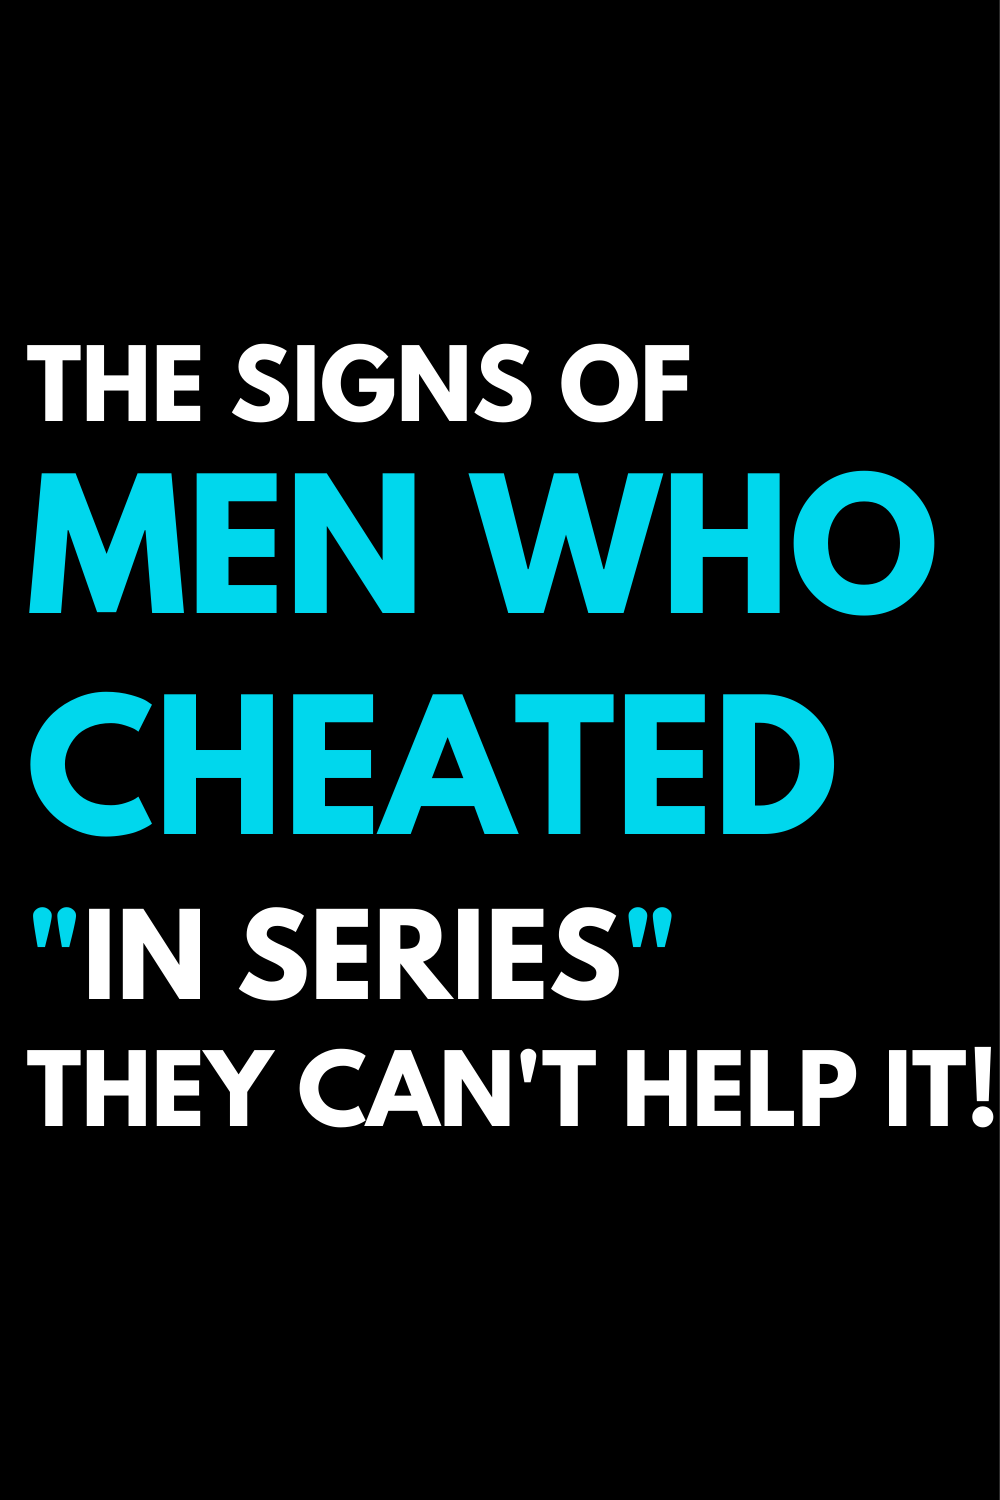 The signs of men who cheated "in series". They can't help it!